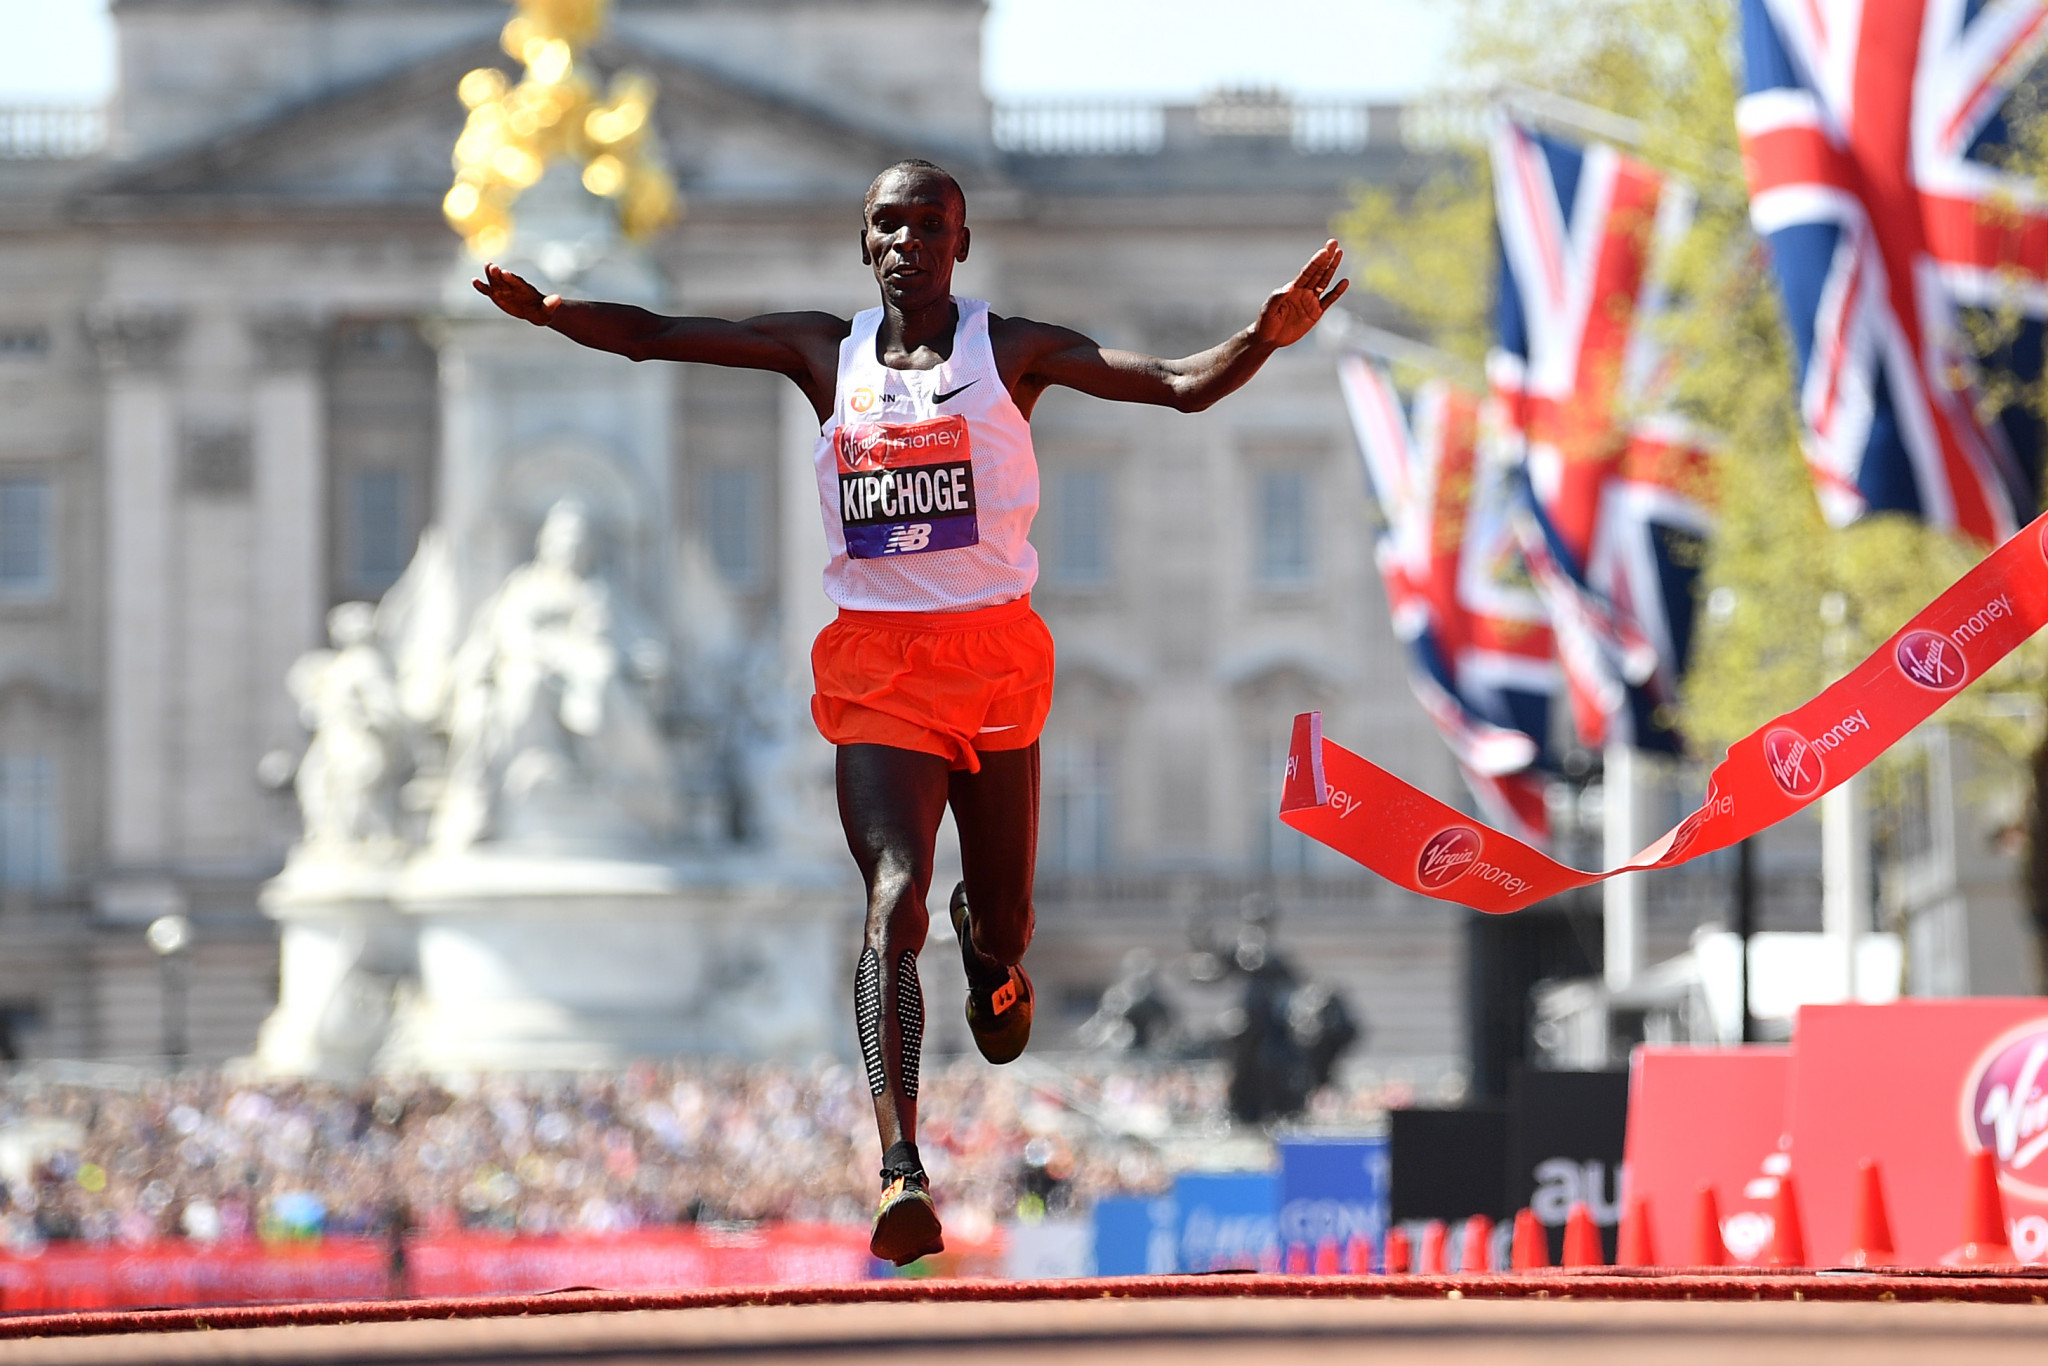 Kenya's Eliud Kipchoge dominated the men's race and claimed a third Virgin London Marathon win ©Getty Images